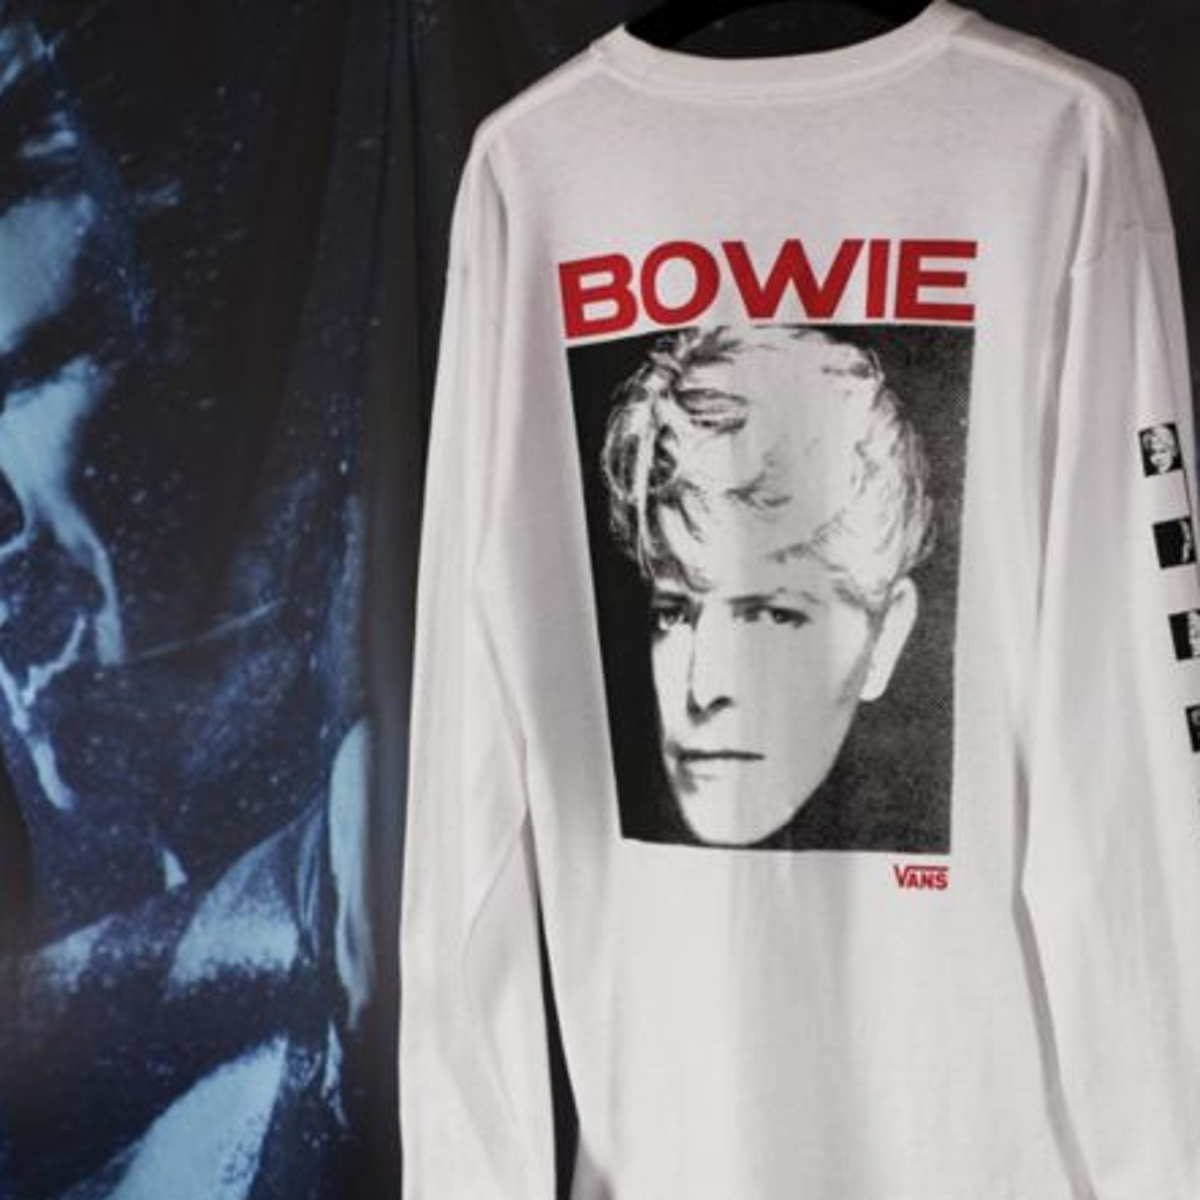 Vans launches David Bowie collection so you can channel